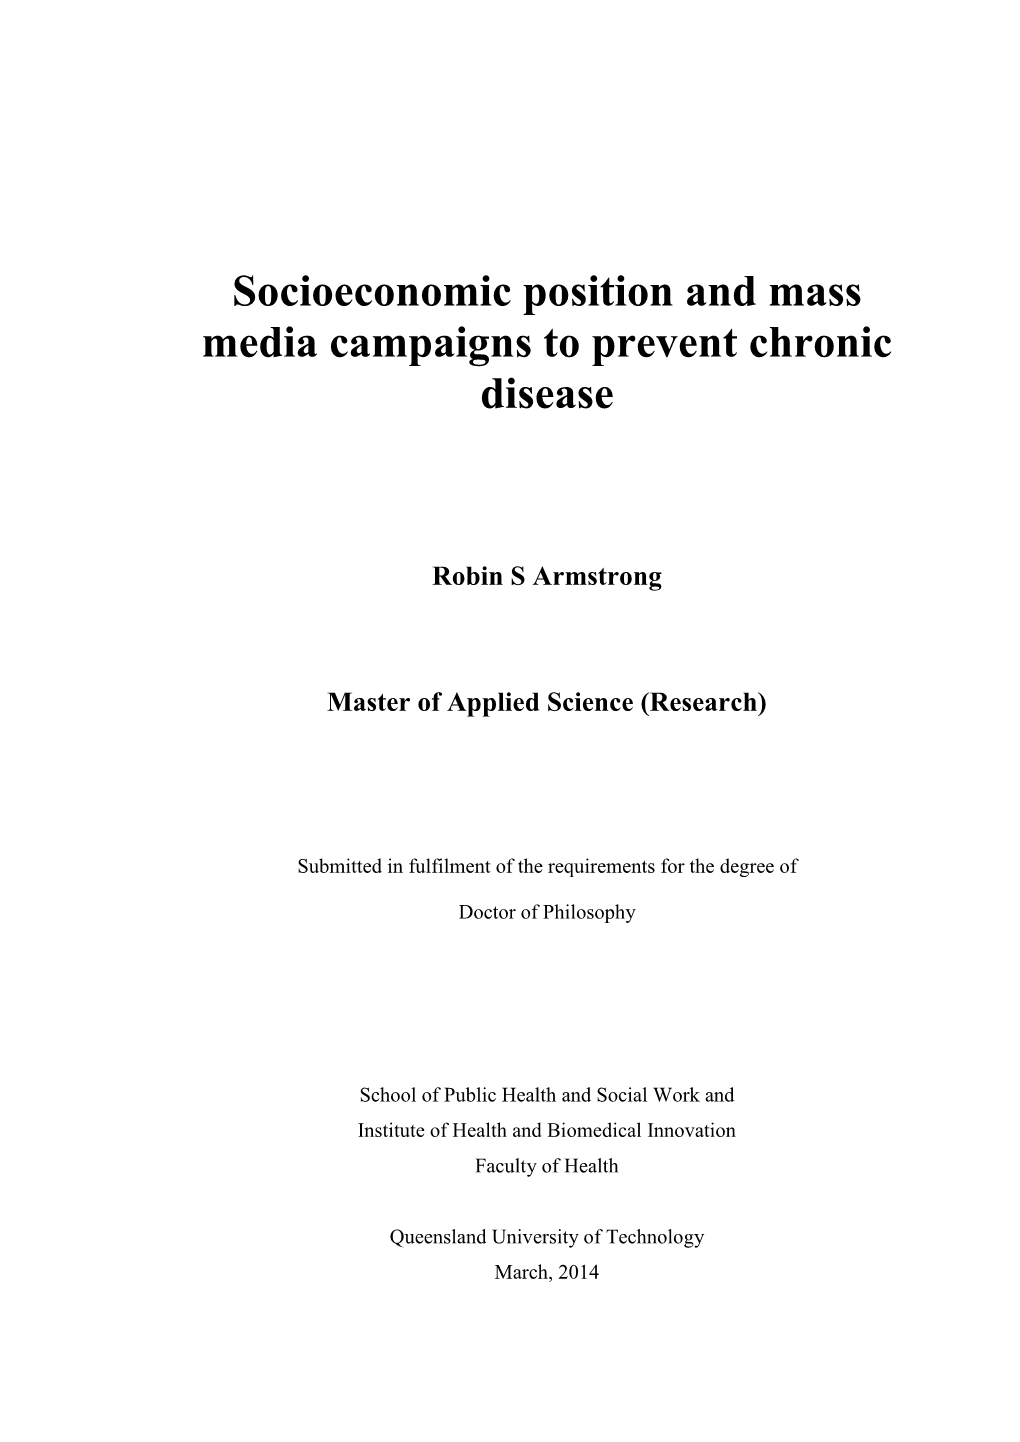 Socioeconomic Position and Mass Media Campaigns to Prevent Chronic Disease